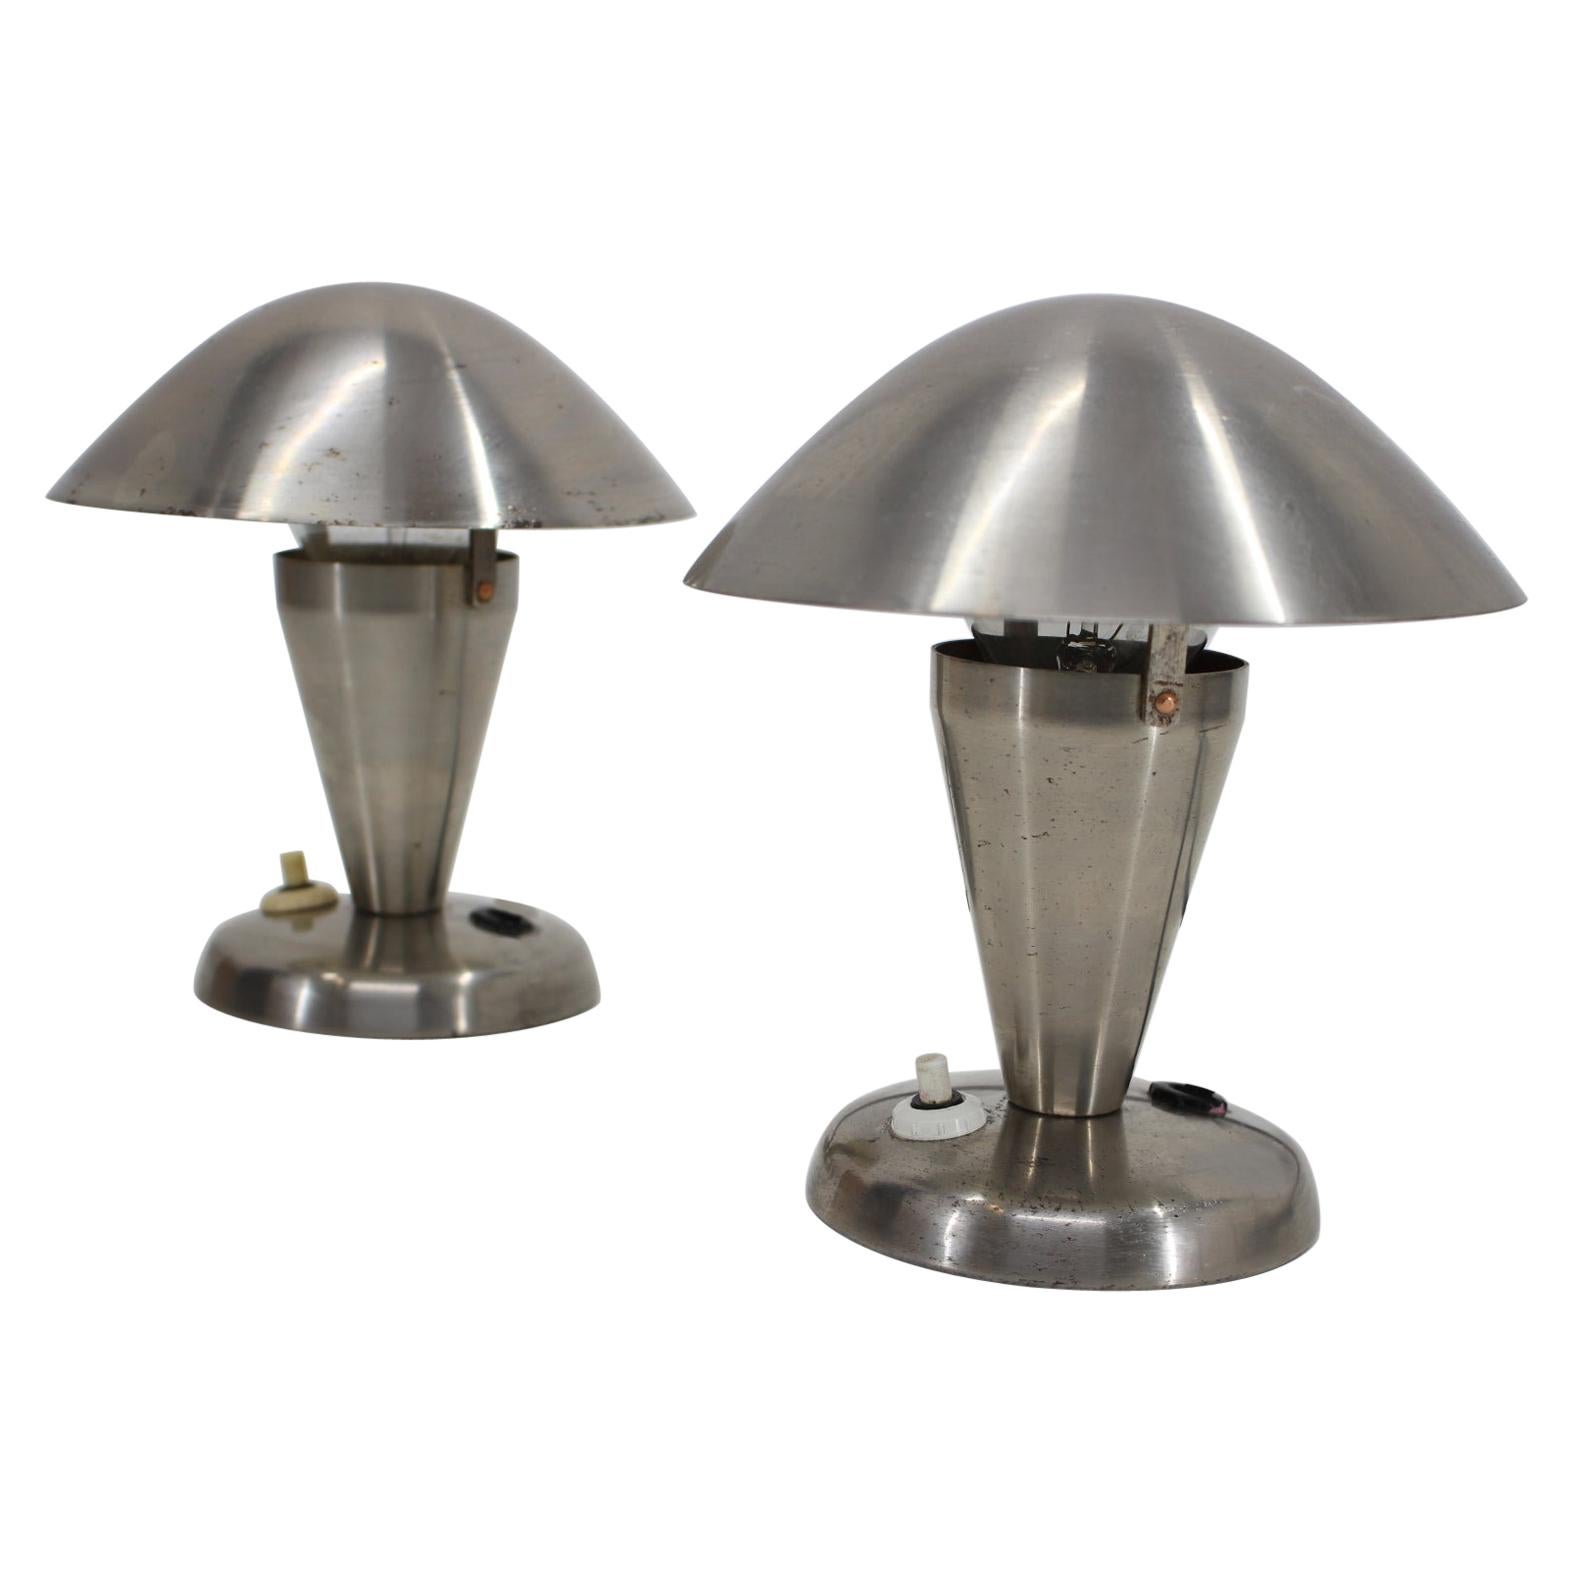 1930s Pair of Chrome Plated Bauhaus Lamps, Czechoslovakia For Sale